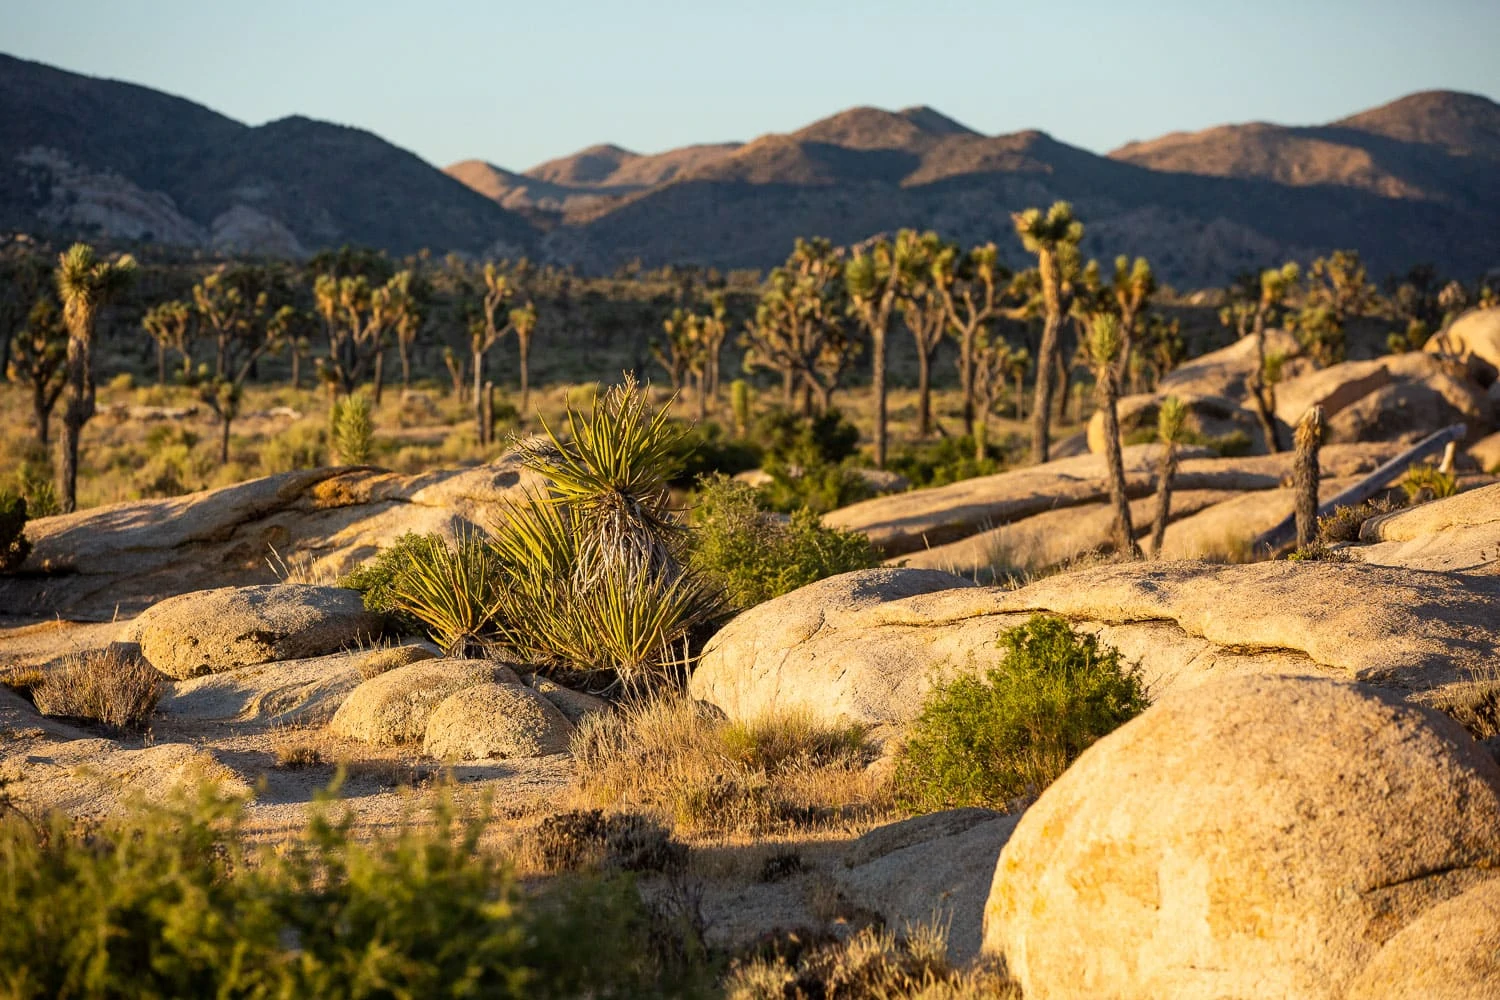 A colorful desert landscape at Hidden Valley with golden rocks, green joshua trees, and distant blue mountains.